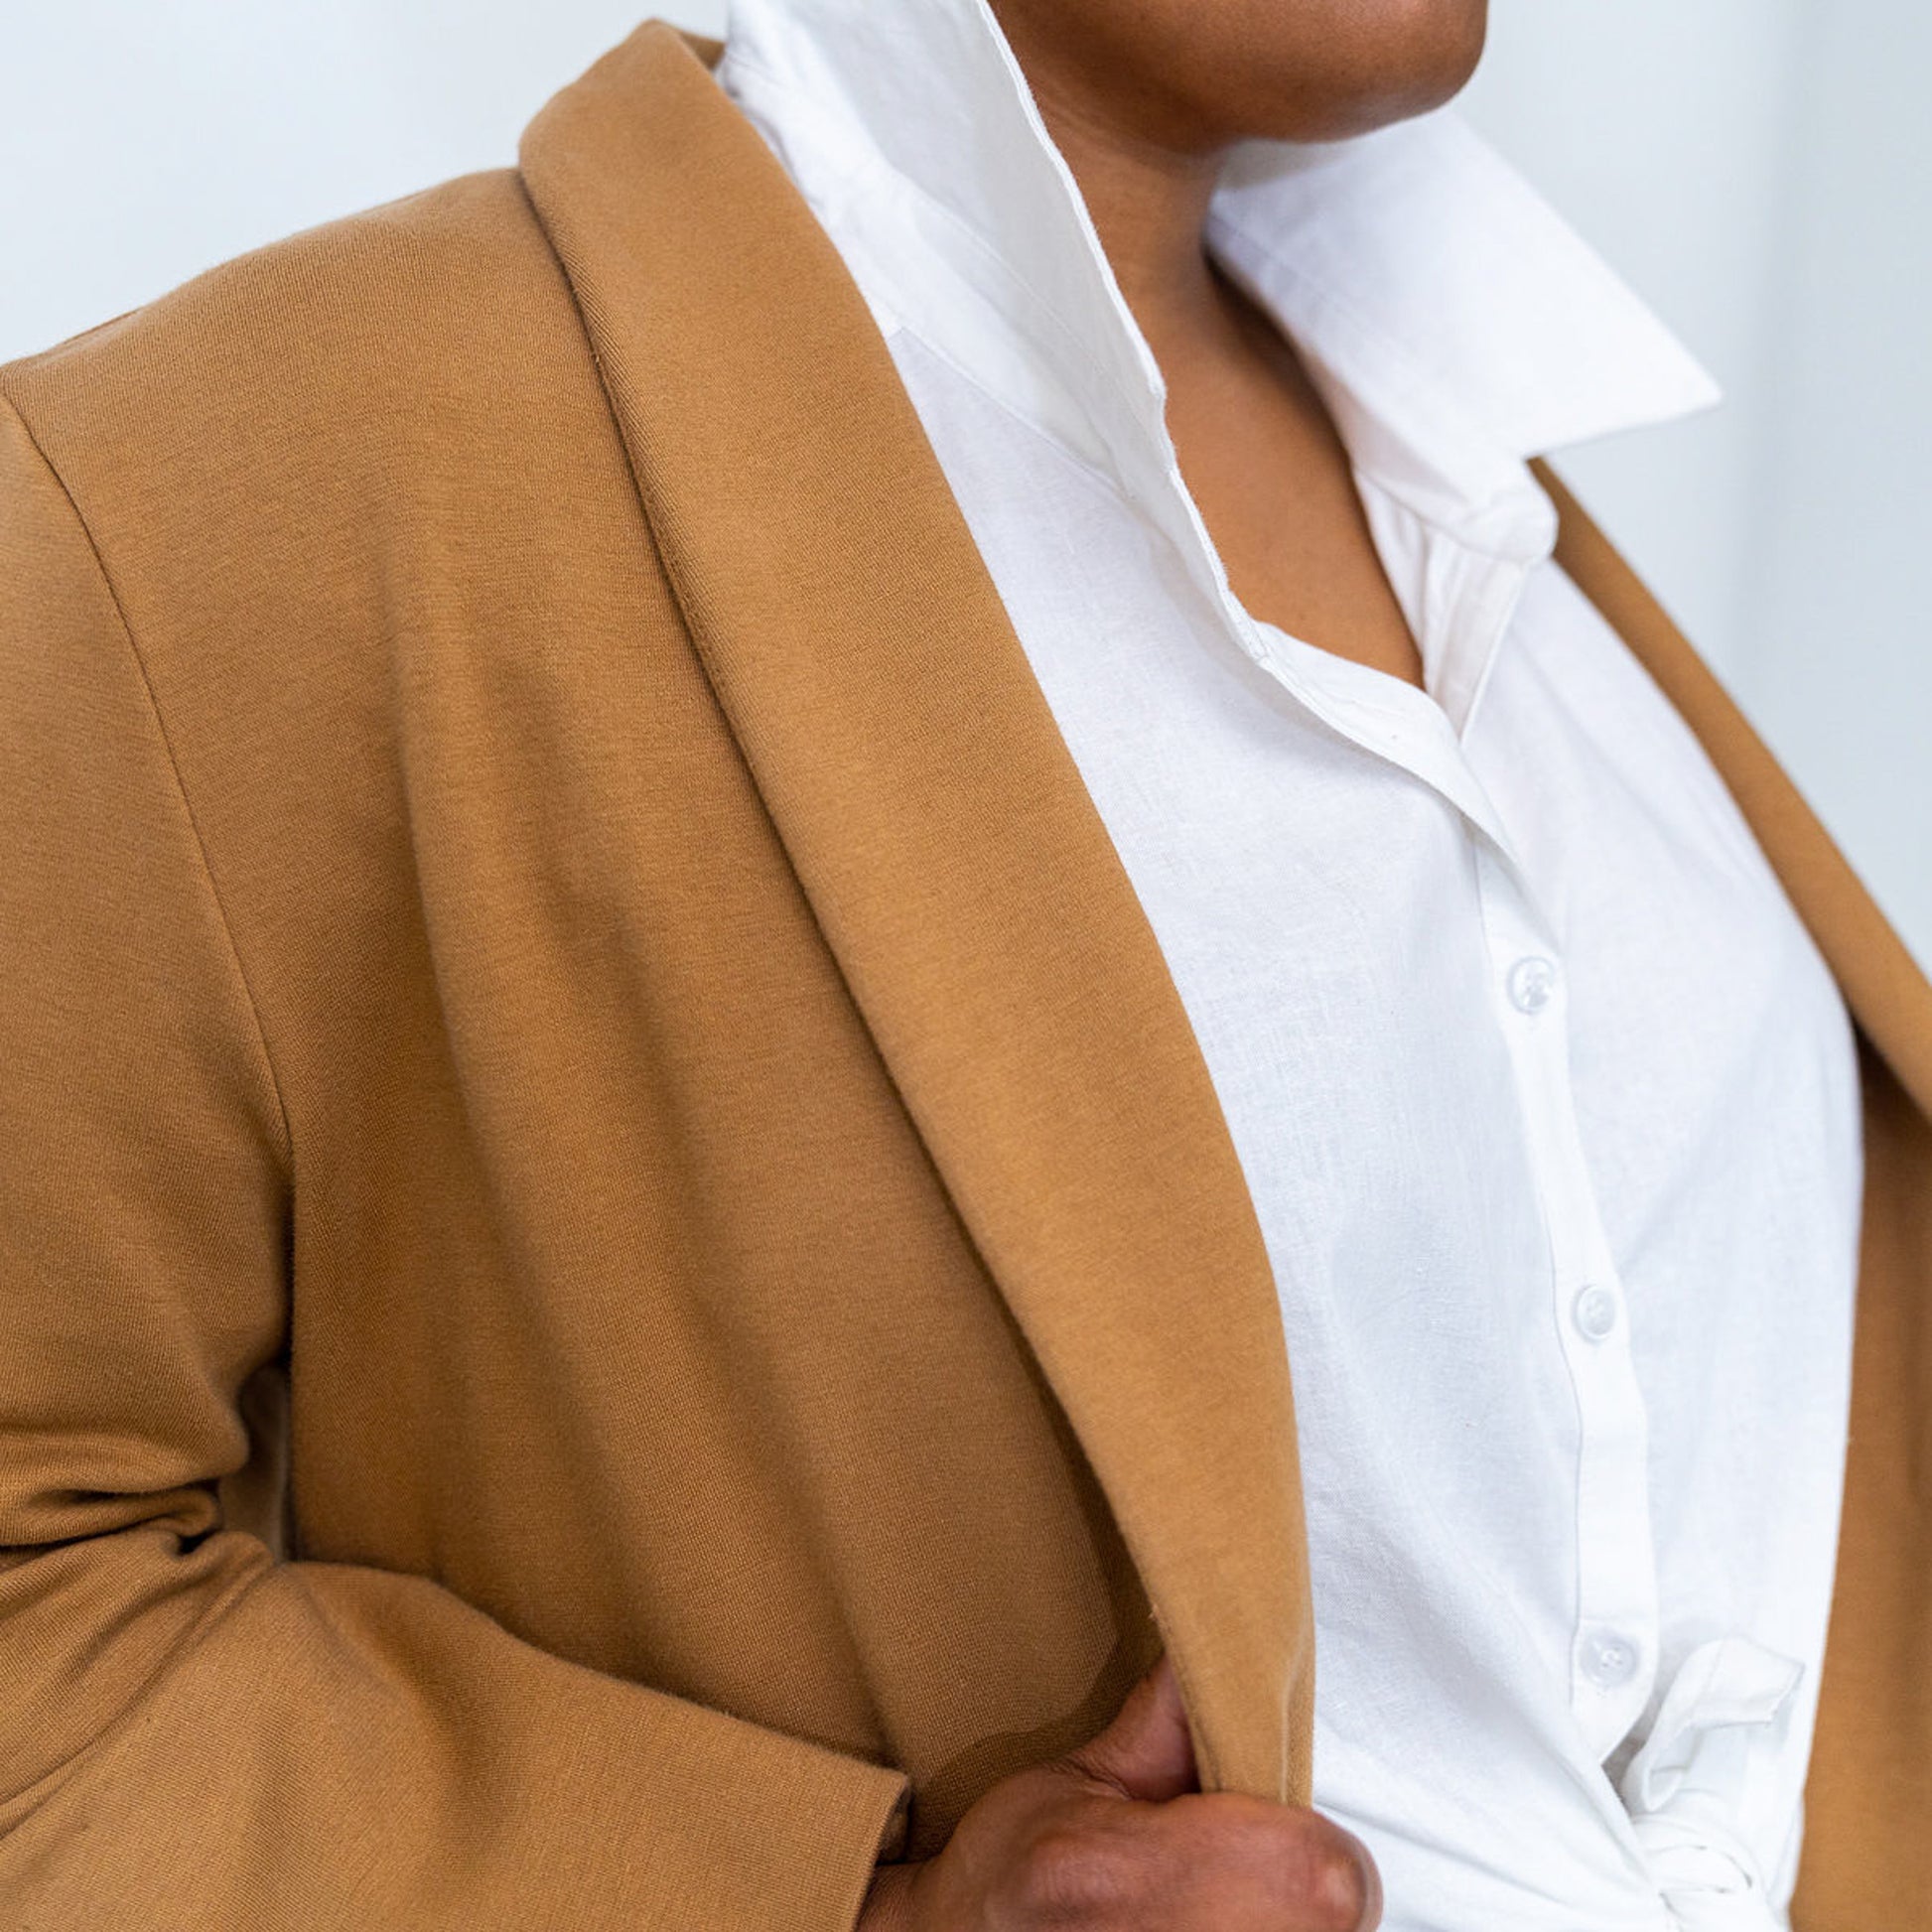 ethical fair trade fair-trade anti-traffic anti-trafficking jacket blazer double-knit cotton fall fall-wear thick warm collar collared pocket pockets dress casual toasted coconut toasted-coconut beige tan sand camel